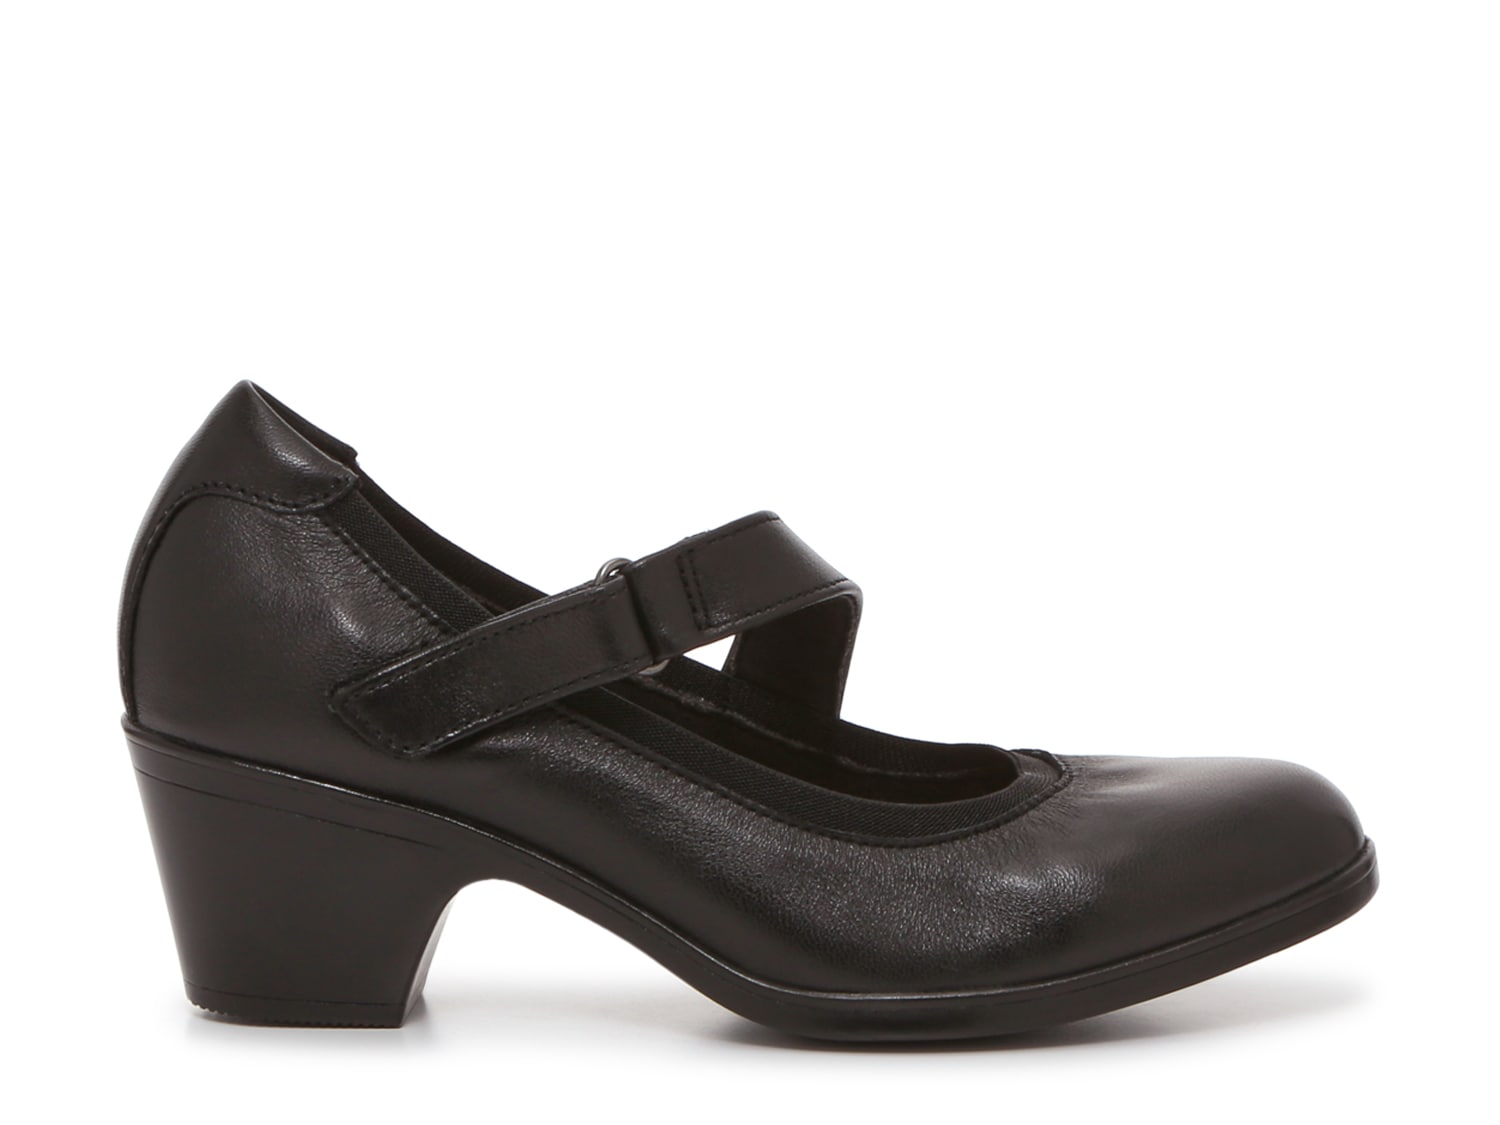 Clarks Women's Orianna Derby Leather Shoes